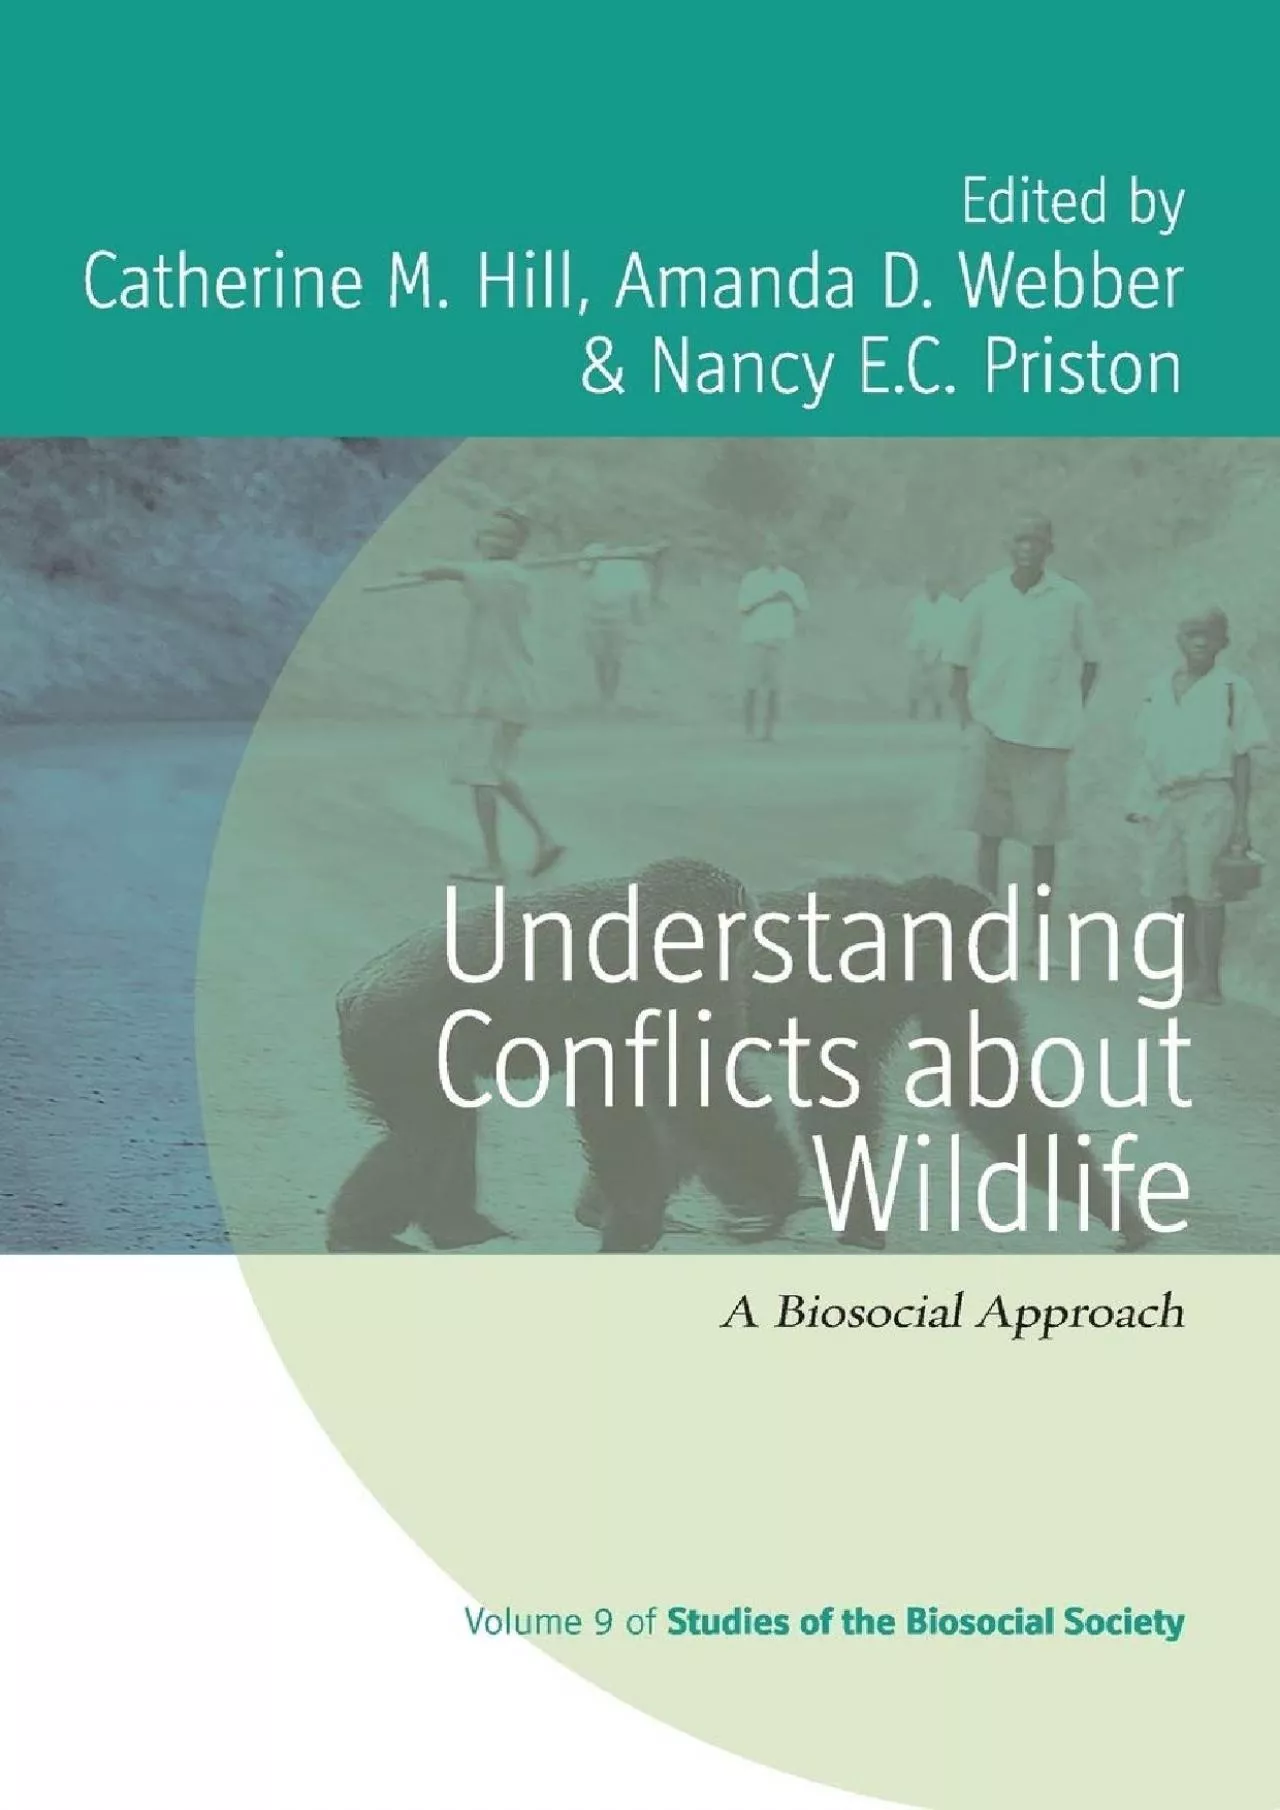 (BOOK)-Understanding Conflicts about Wildlife: A Biosocial Approach (Studies of the Biosocial